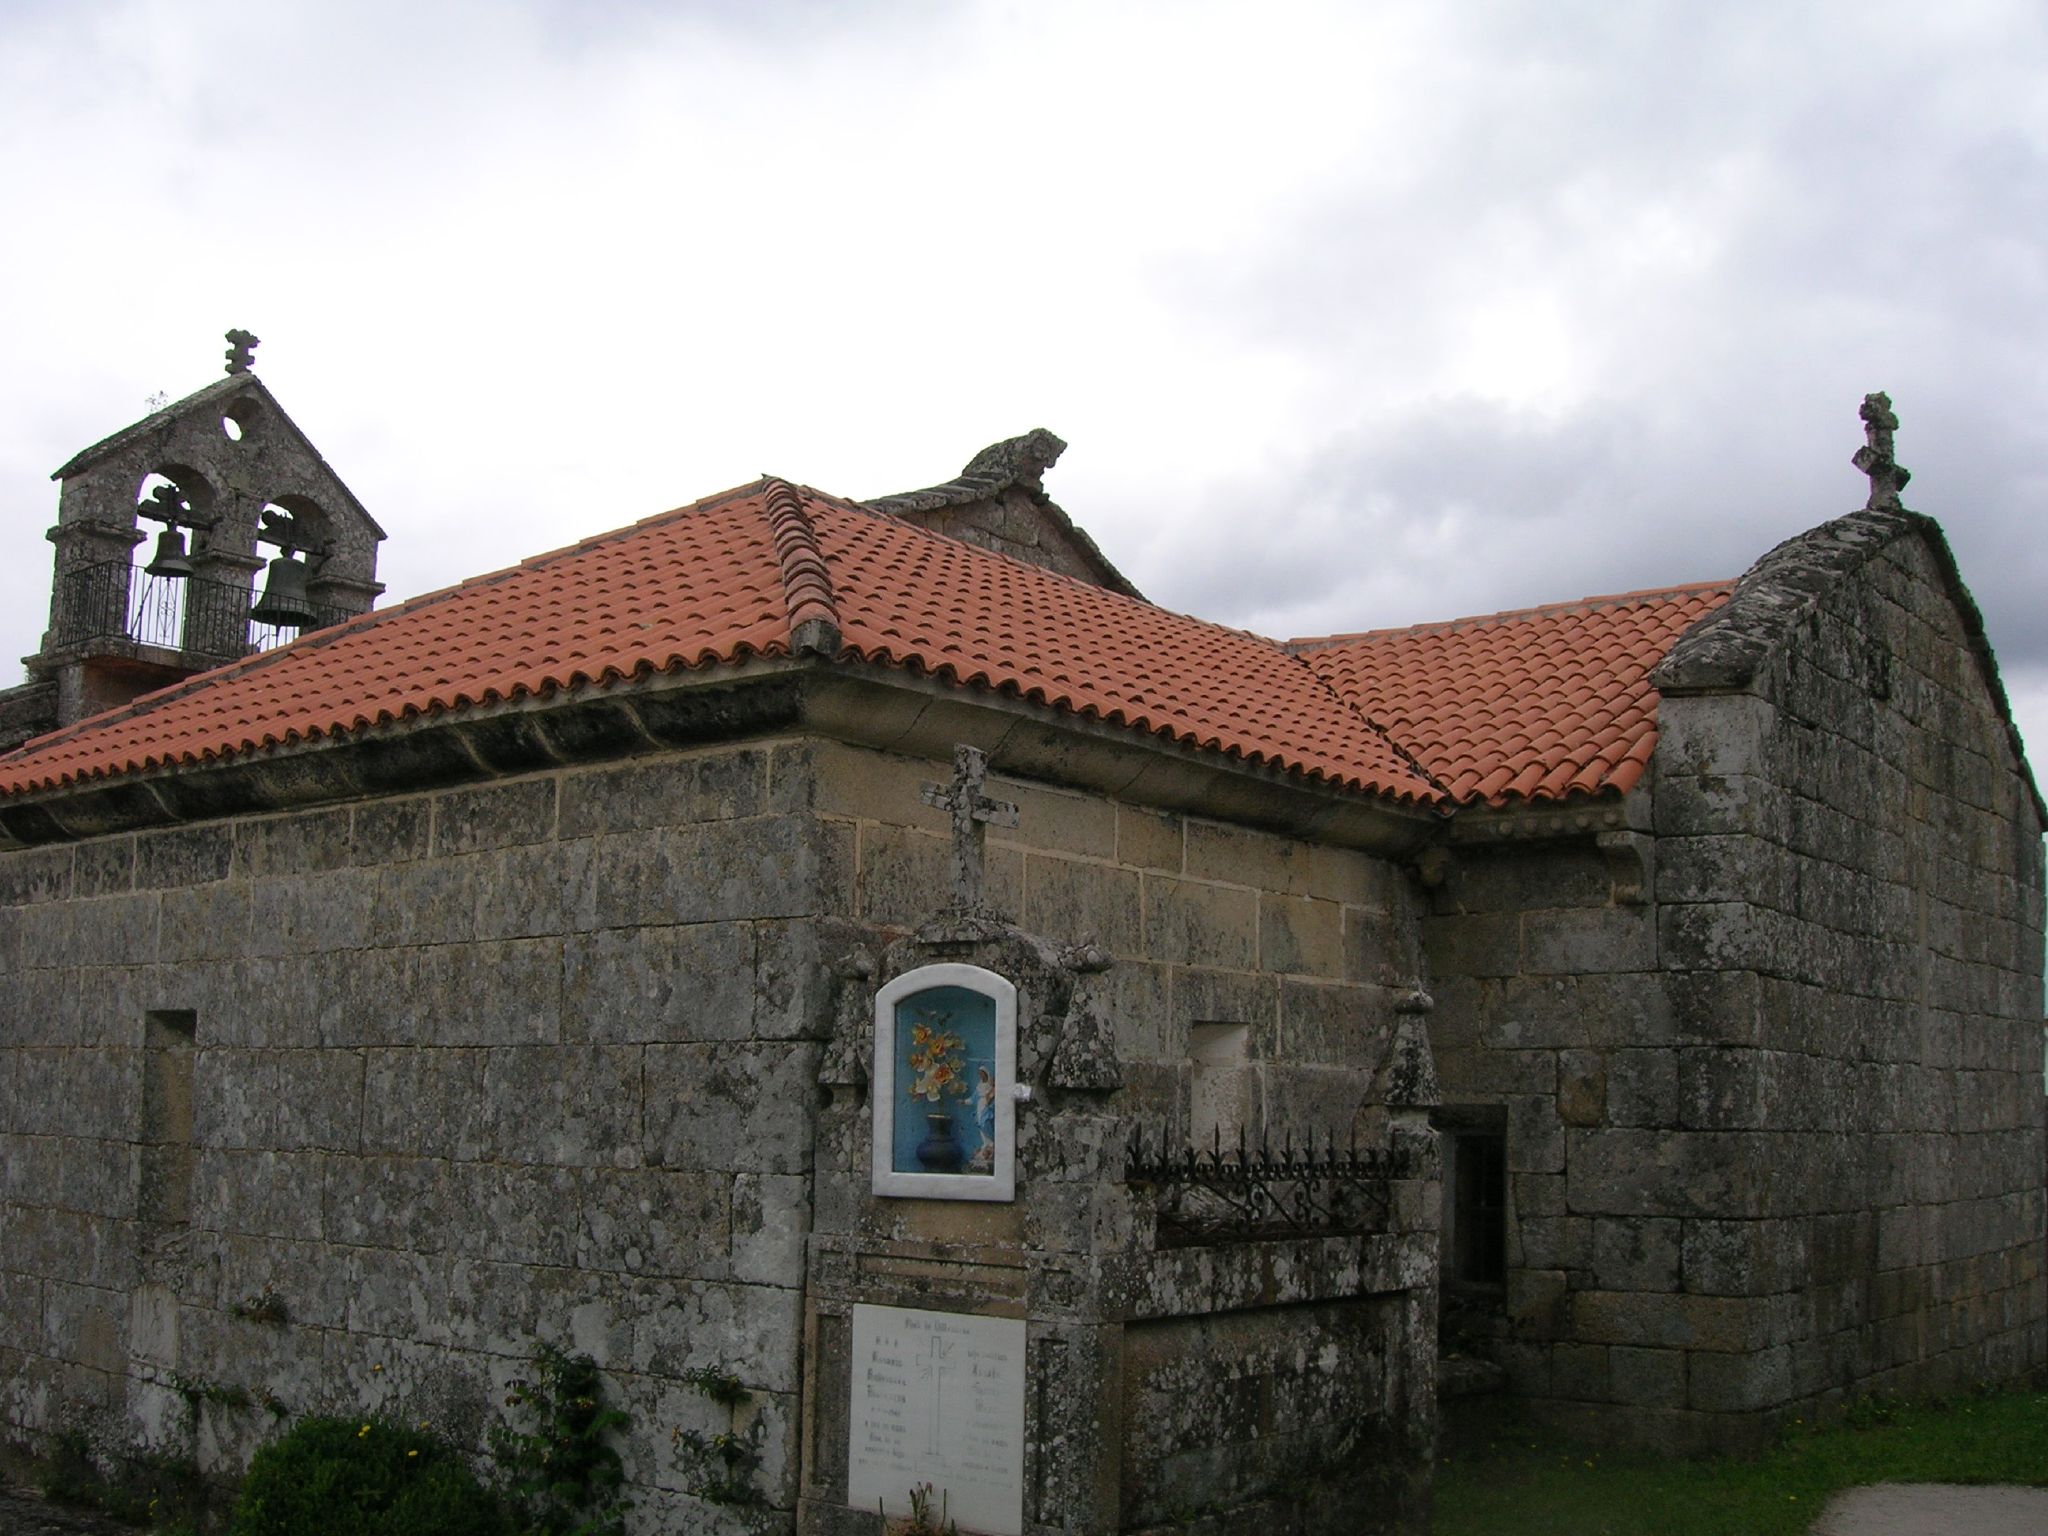 an old building with a red roof and a bell tower